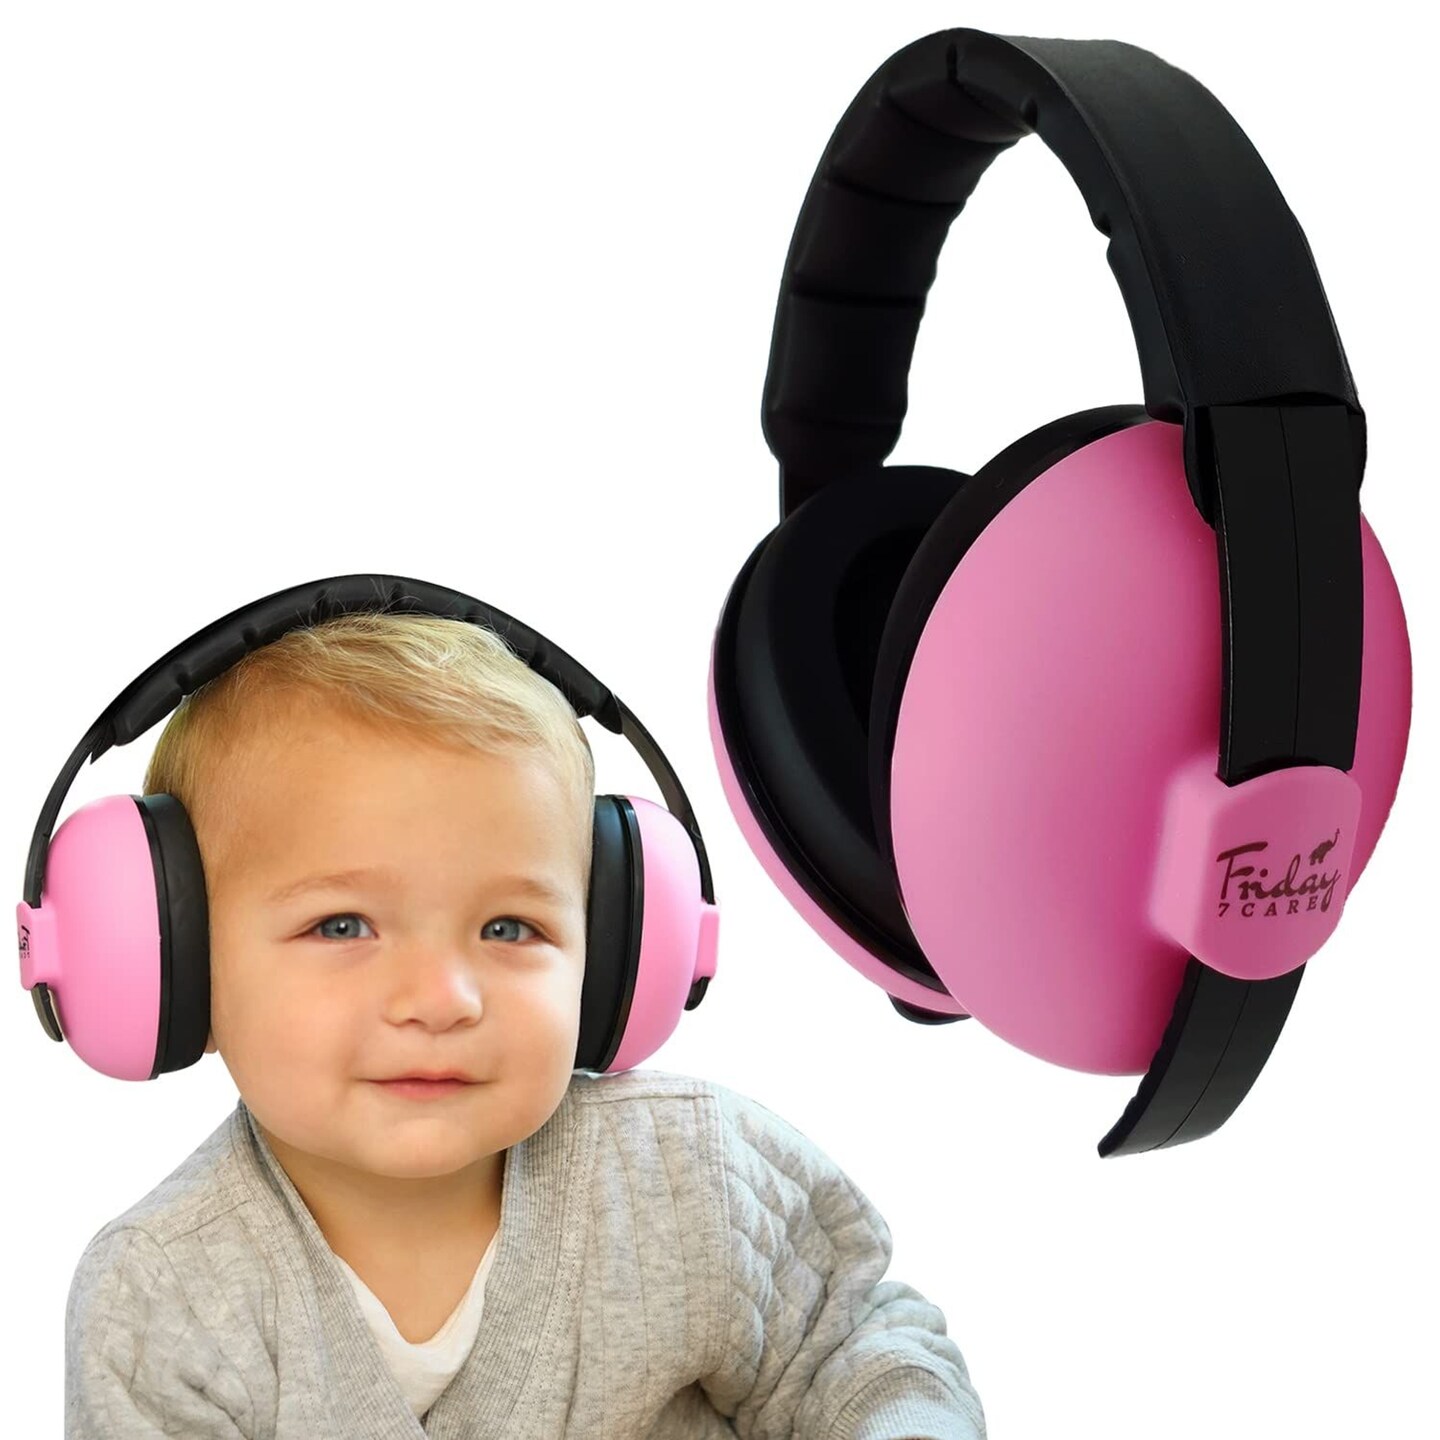 Friday 7Care Baby Headphones - Baby Ear Protection | Baby Noise Cancelling Headphones for Ages 0-24 Months, Pink